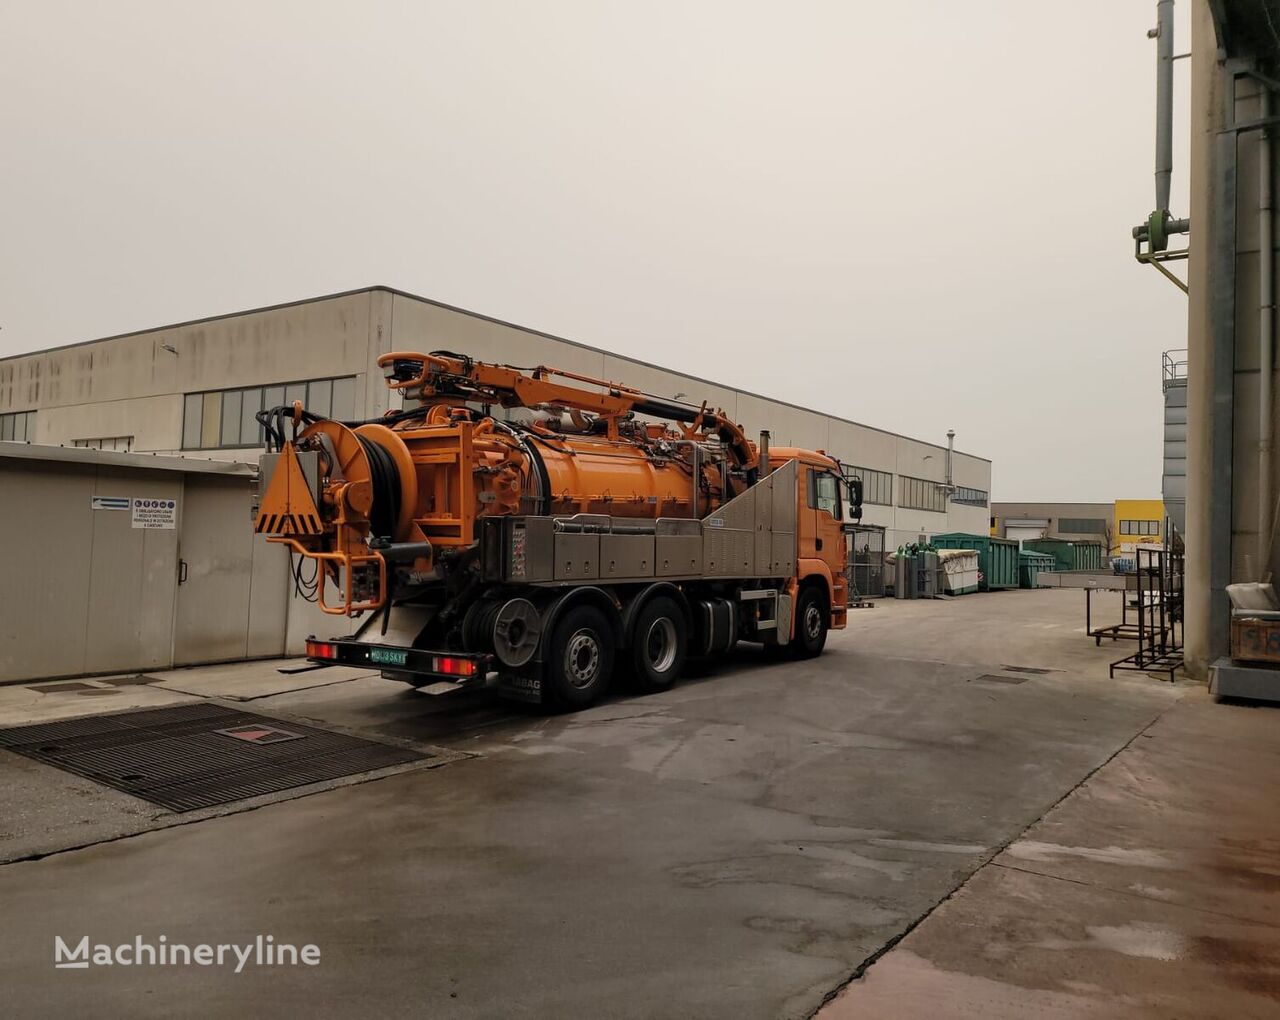 MAN TGA 26.430 combination sewer cleaner